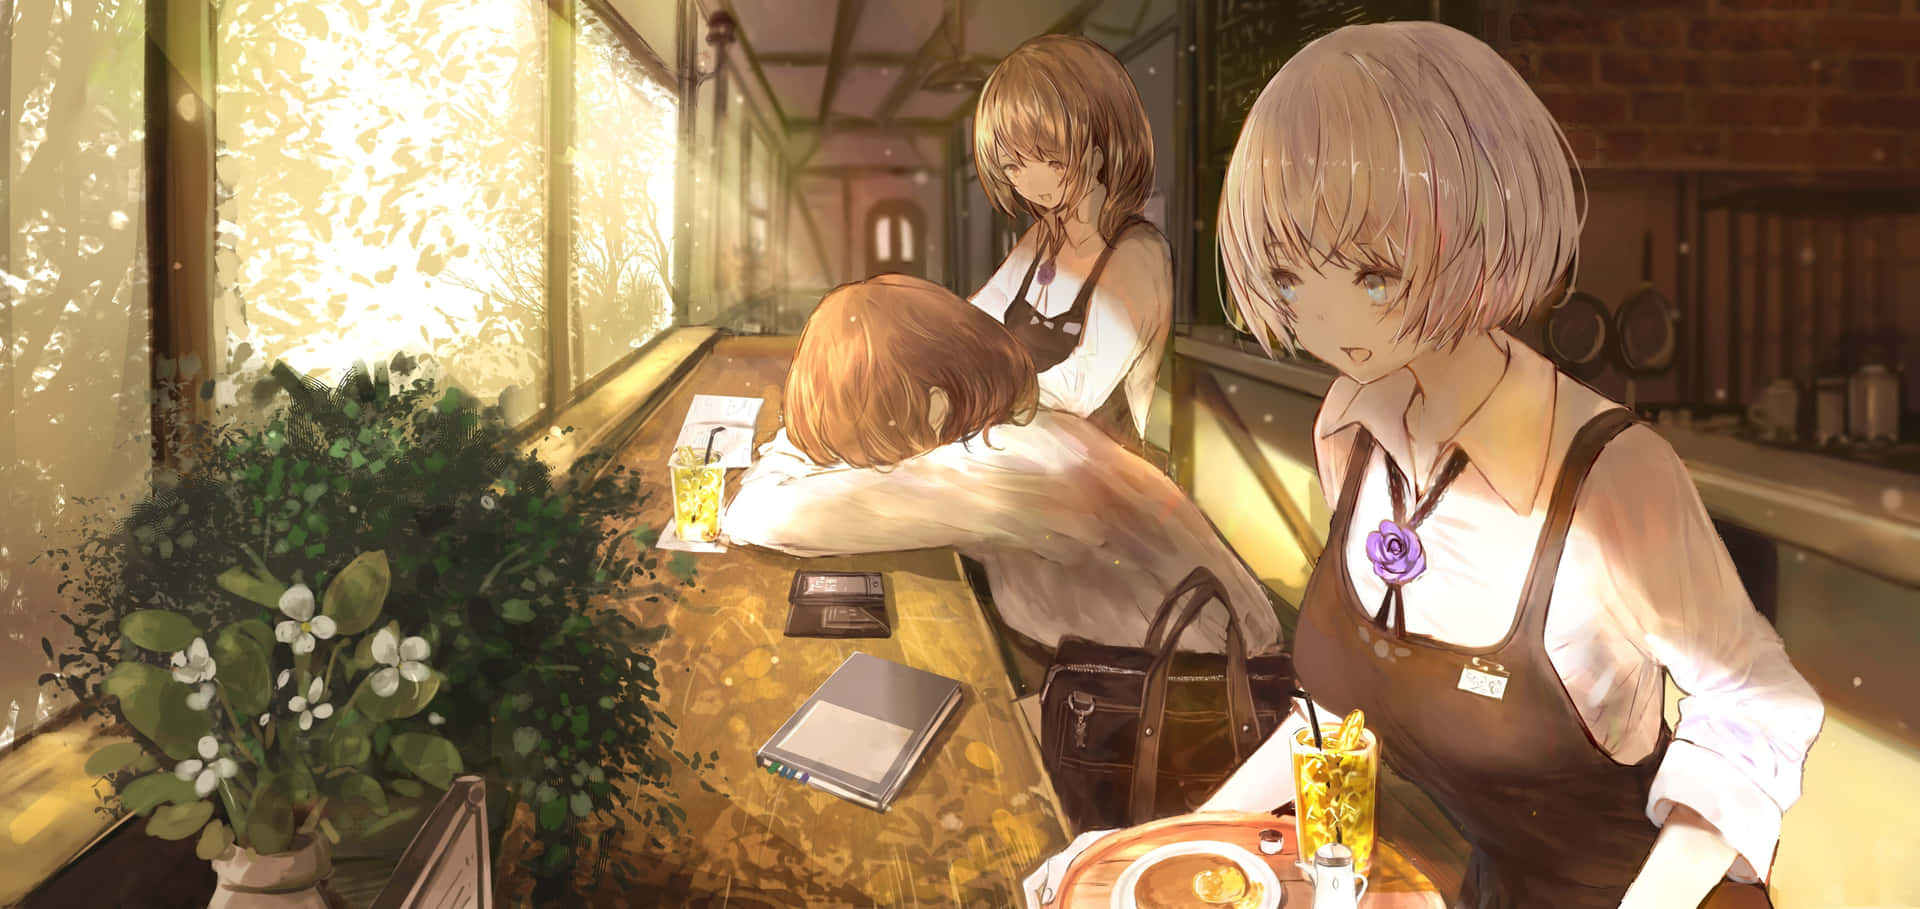 Anime Students At Cafe Wallpaper